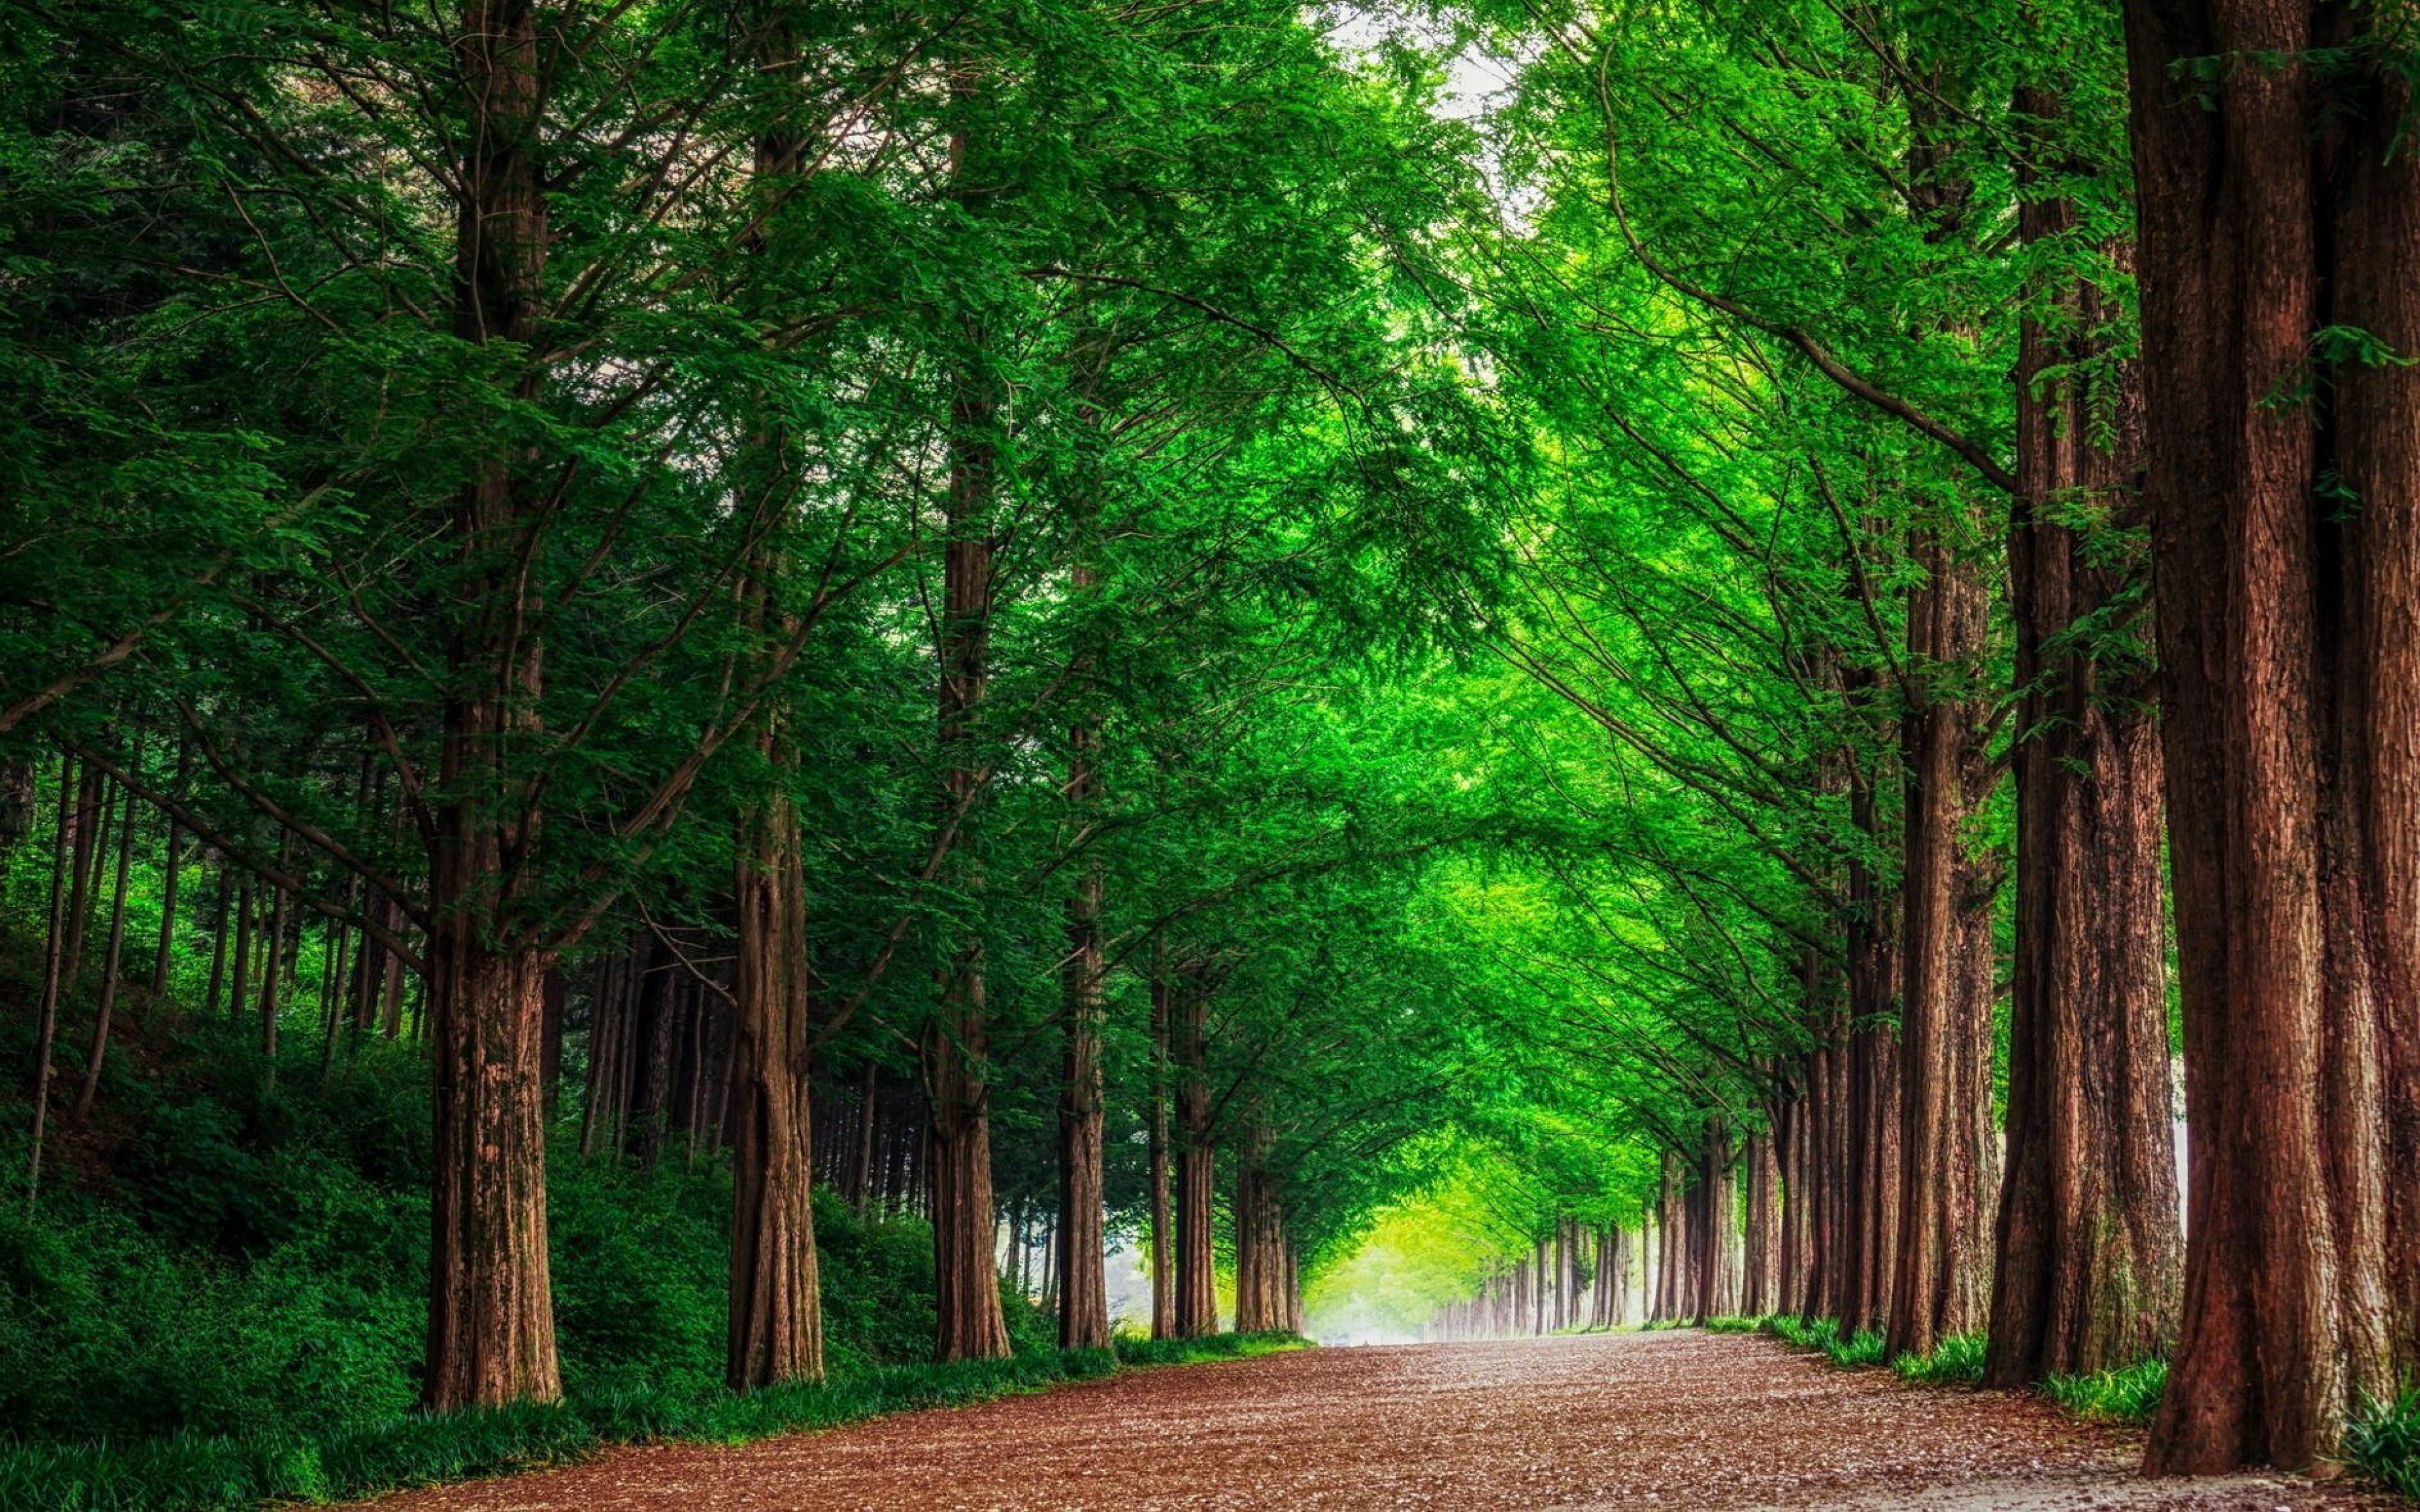 Wallpaper Green Trees on Brown Dirt Road During Daytime, Background Free Image